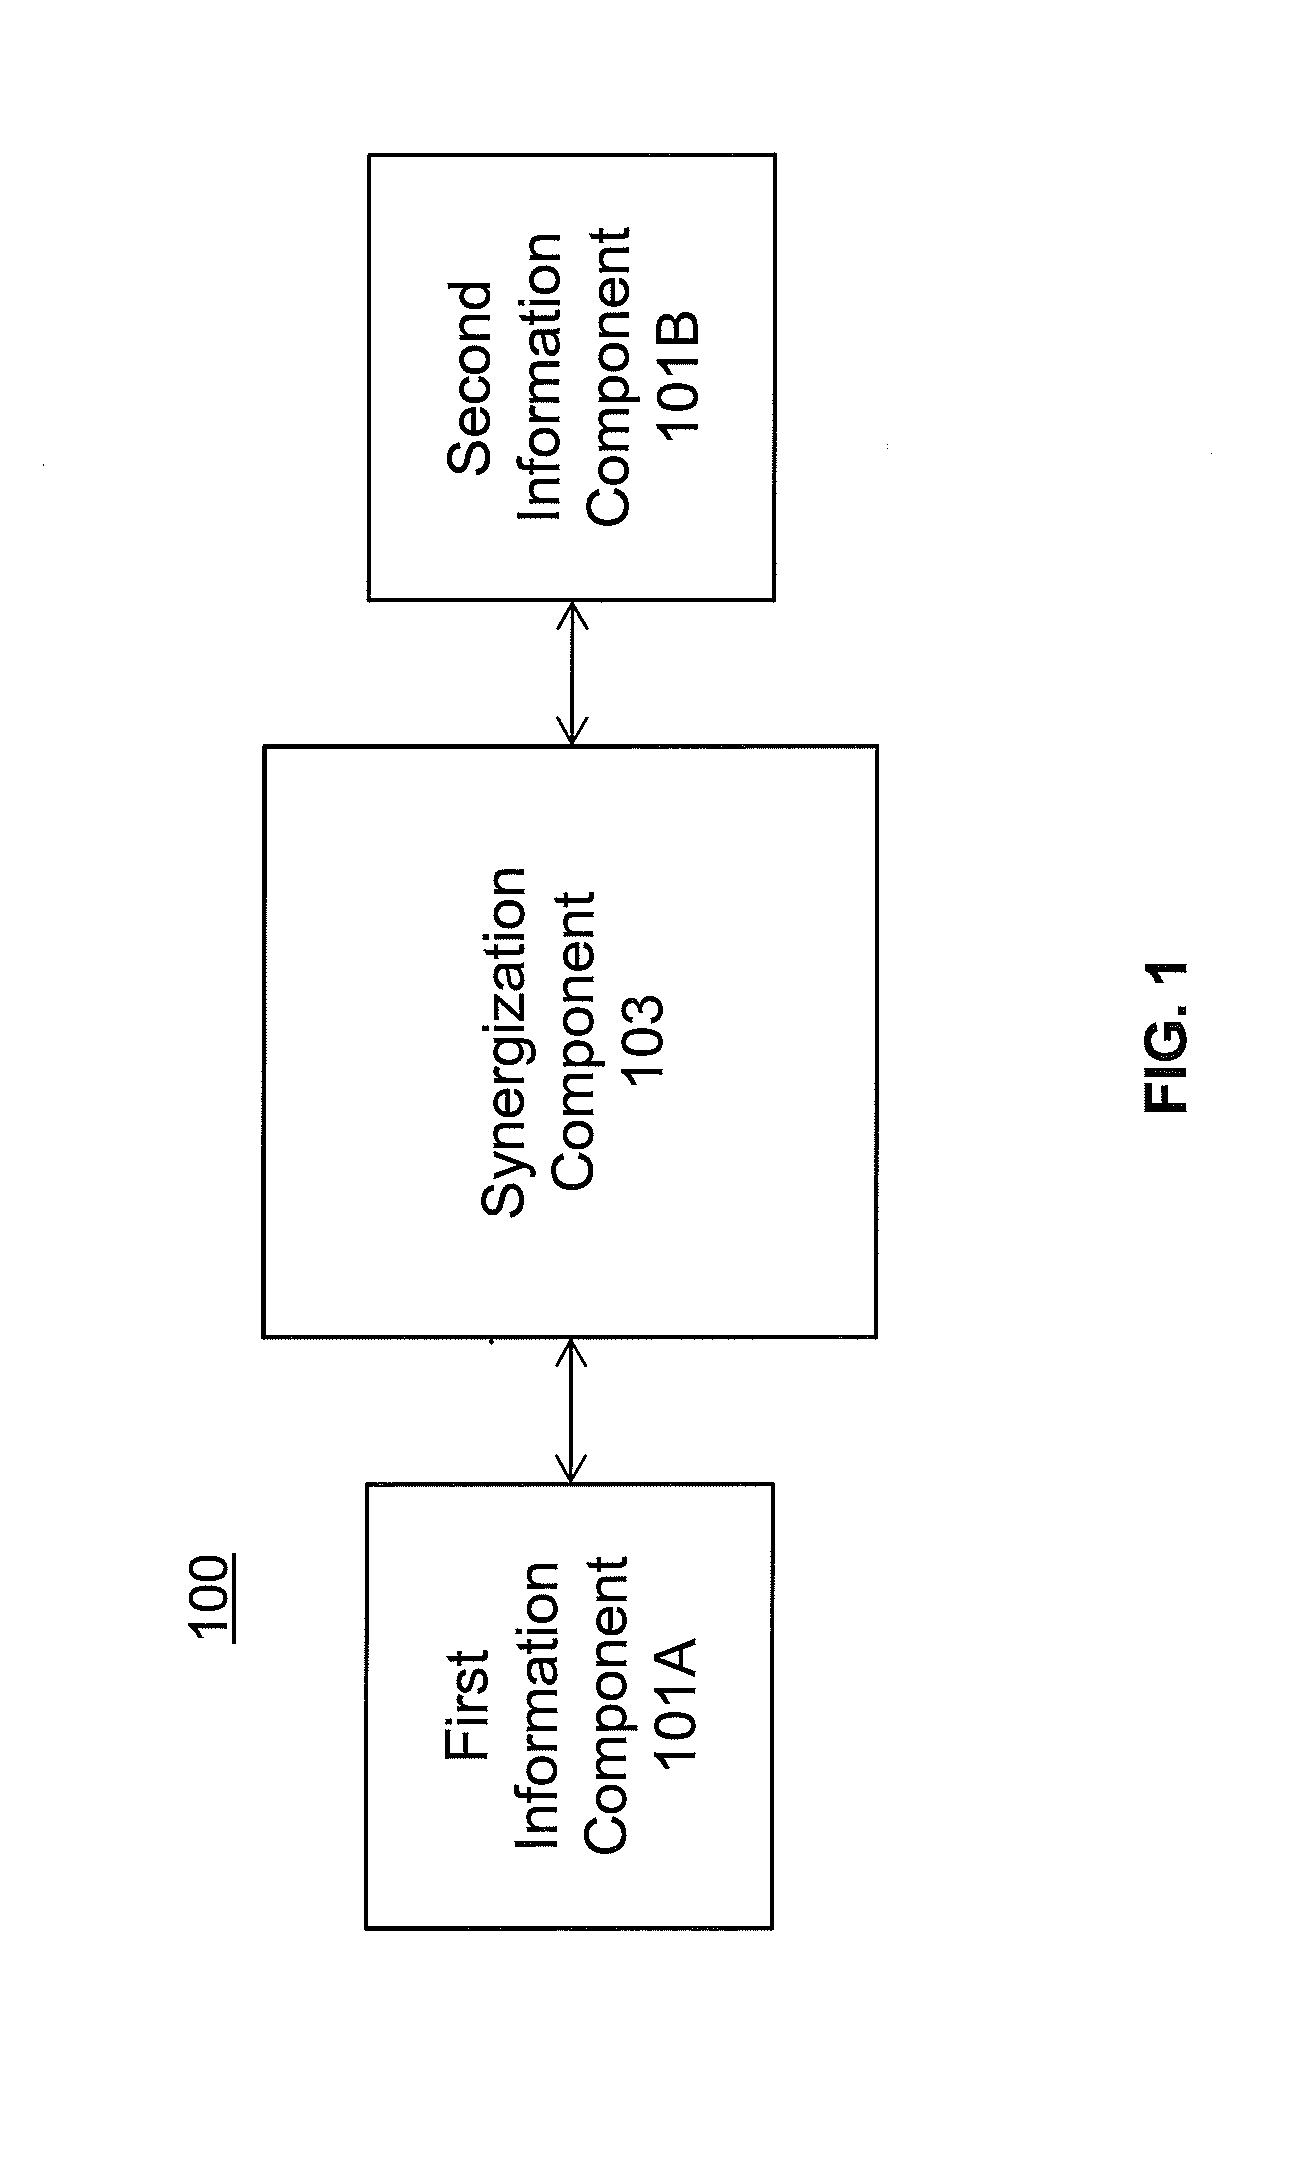 System and methods for detection and selection of a resource among available resources